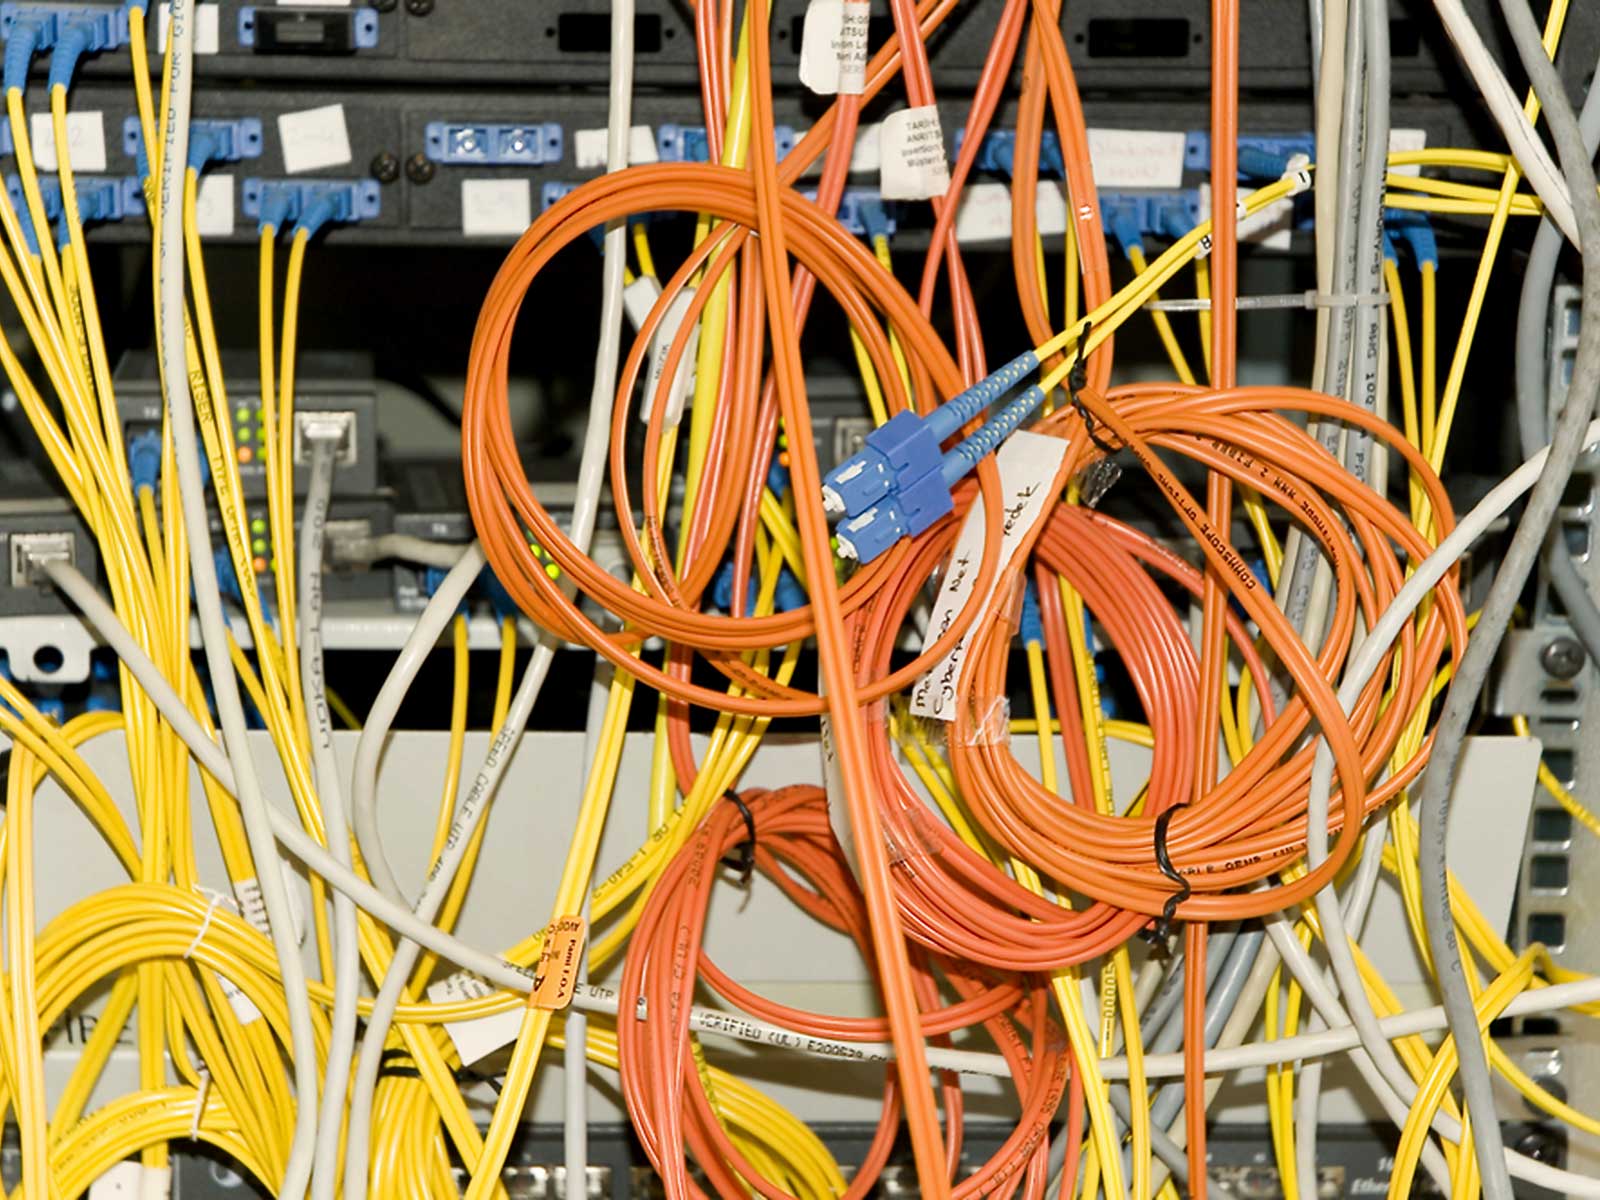 Network wiring and cabling